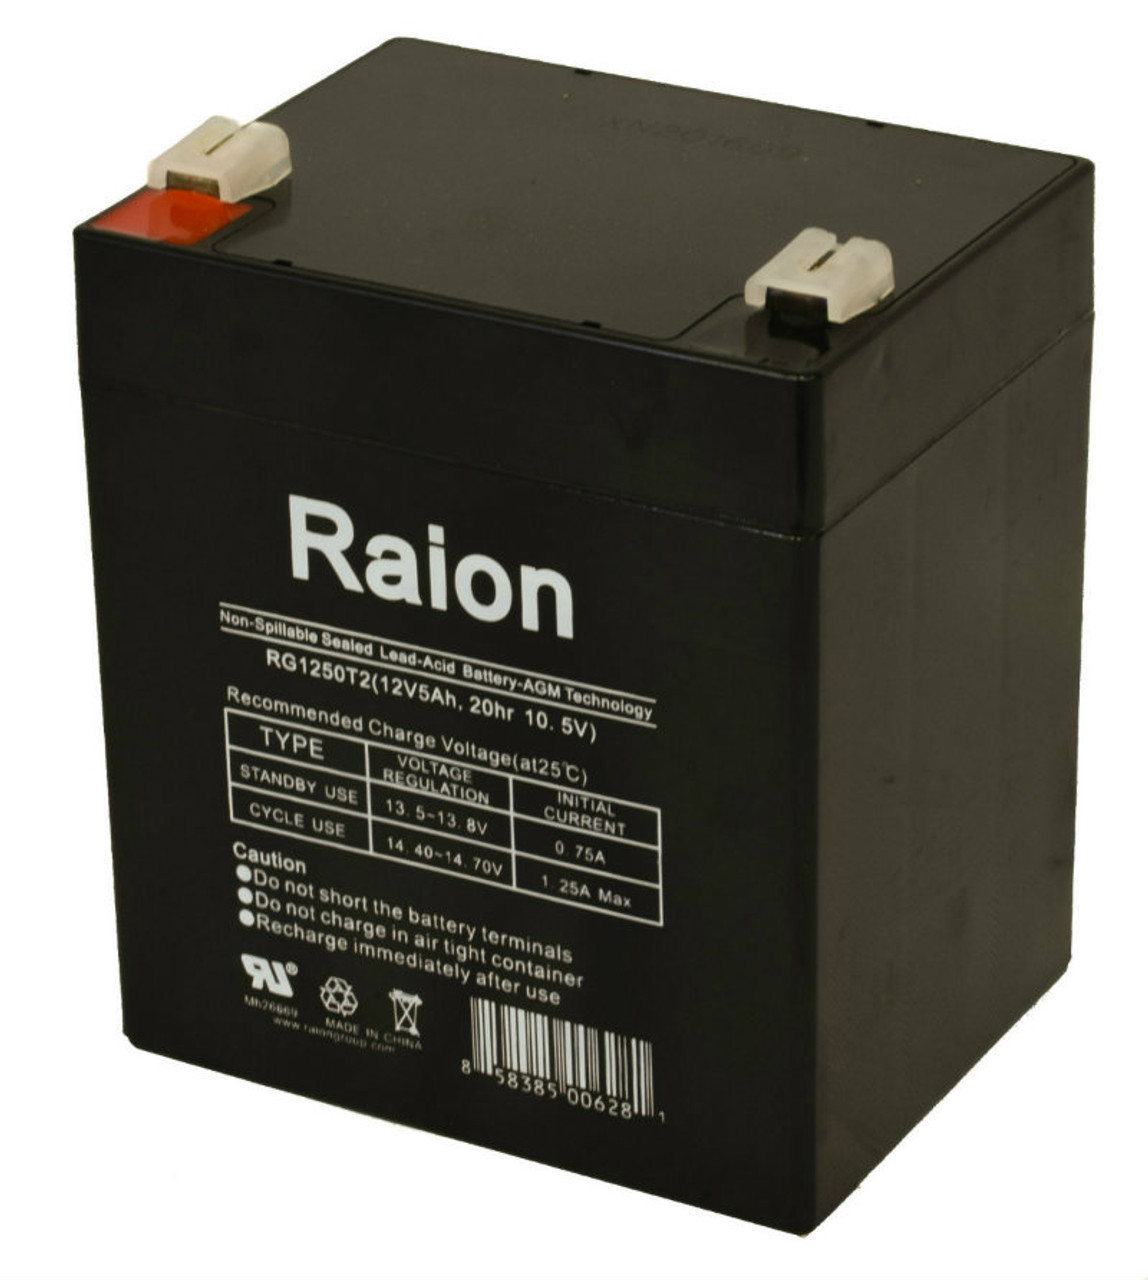 Raion Power RG1250T2 Replacement Battery for Tysonic TY12-5